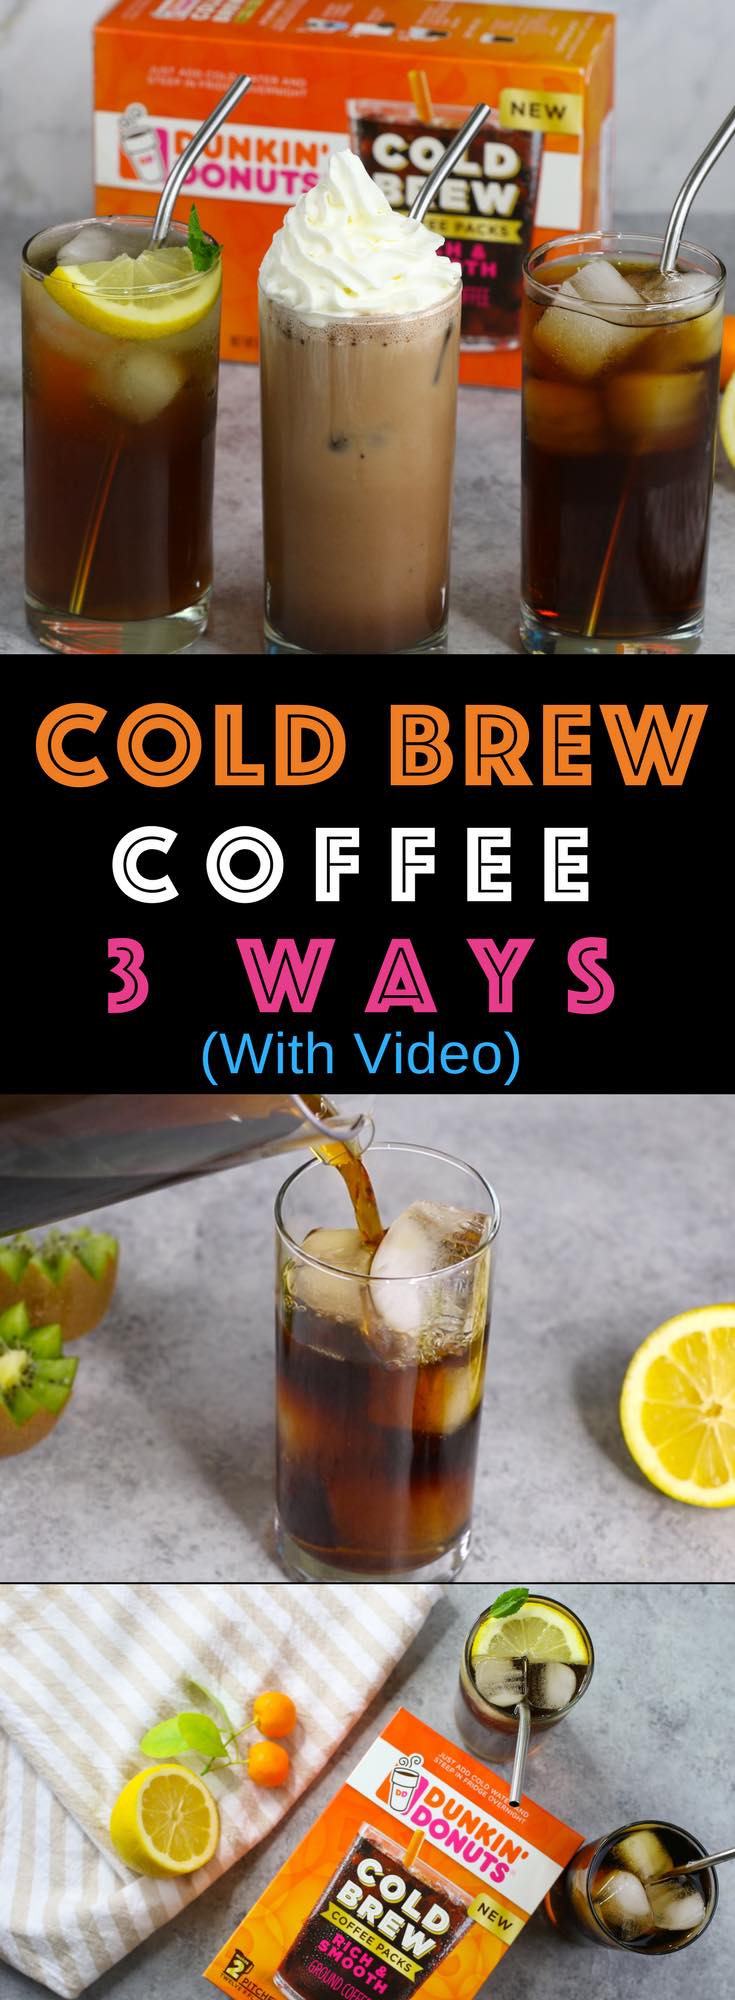 Cold Brew Coffee is so smooth and balanced without the acidity and bitterness of drip coffee. It’s so easy to make at home by steeping Dunkin' Donuts Cold Brew coffee packs in cold water overnight. Make it 3 different ways: Cold Brew with Simple Syrup, Cold Brew Mochas and Cold Brew Lemonade. Perfect for parties and barbecues in summer and every day year round! Video tutorial #coldbrew #DunkinYouBrewYou #walmart AD